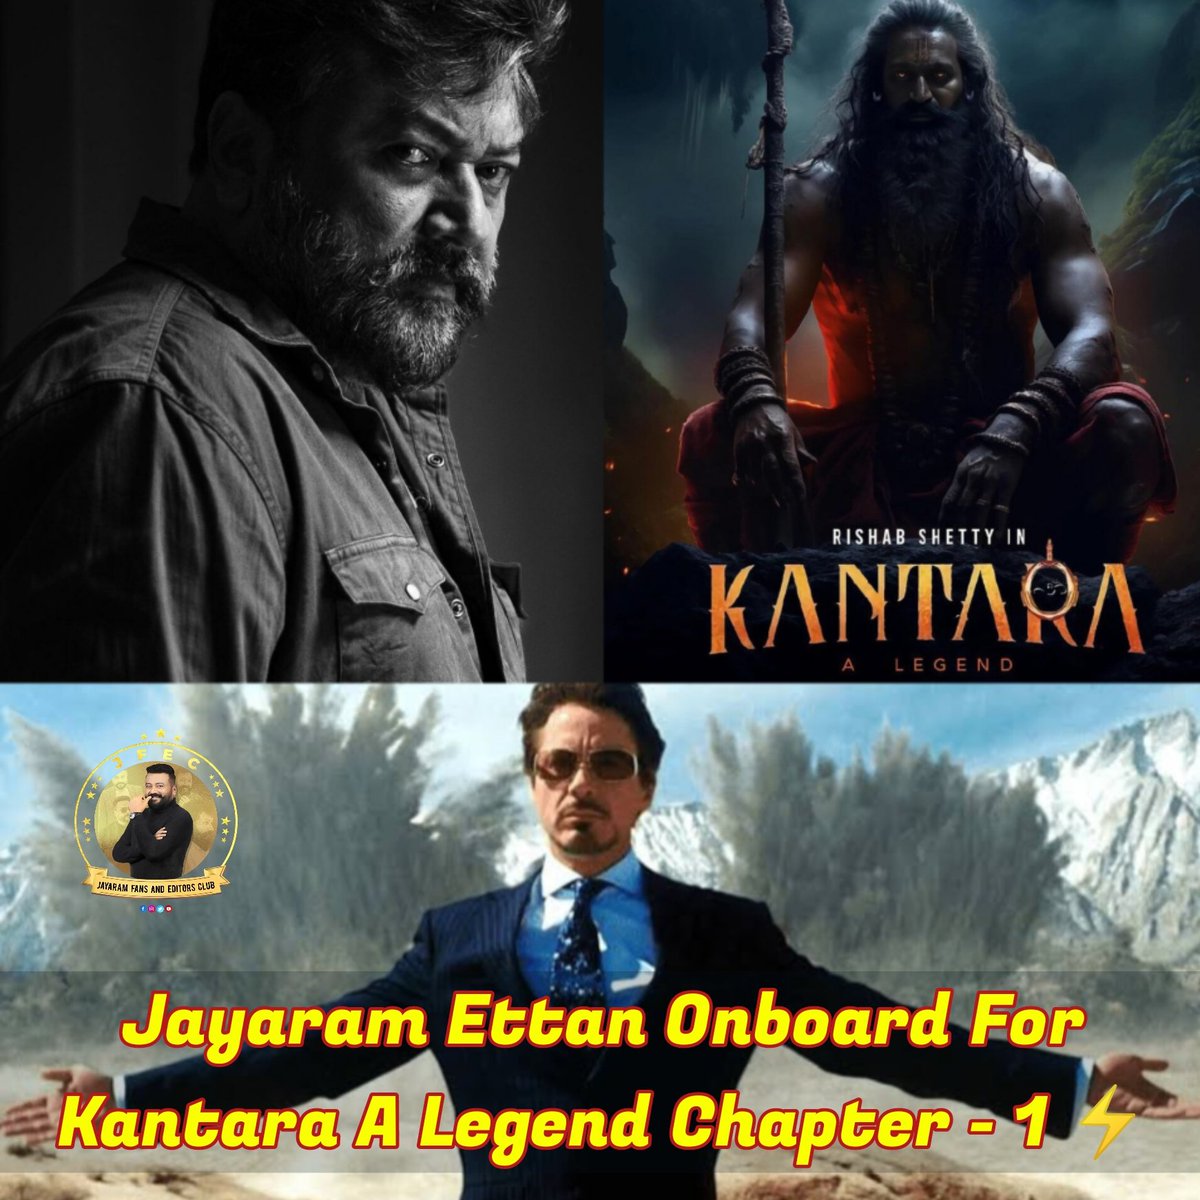 Jayaram Ettan Himself Confirms That He Will Doing An Prominent Role In the Upcoming Pan - Indian Movie Kantara A Legend Chapter - 1 ⚡

Jayaram Ettan - Rishab Shetty Combo 🔥

Waiting For The Official Announcement.... 🙌

#Jayaram #Rishabshetty #Kantara2 #Sandalwood